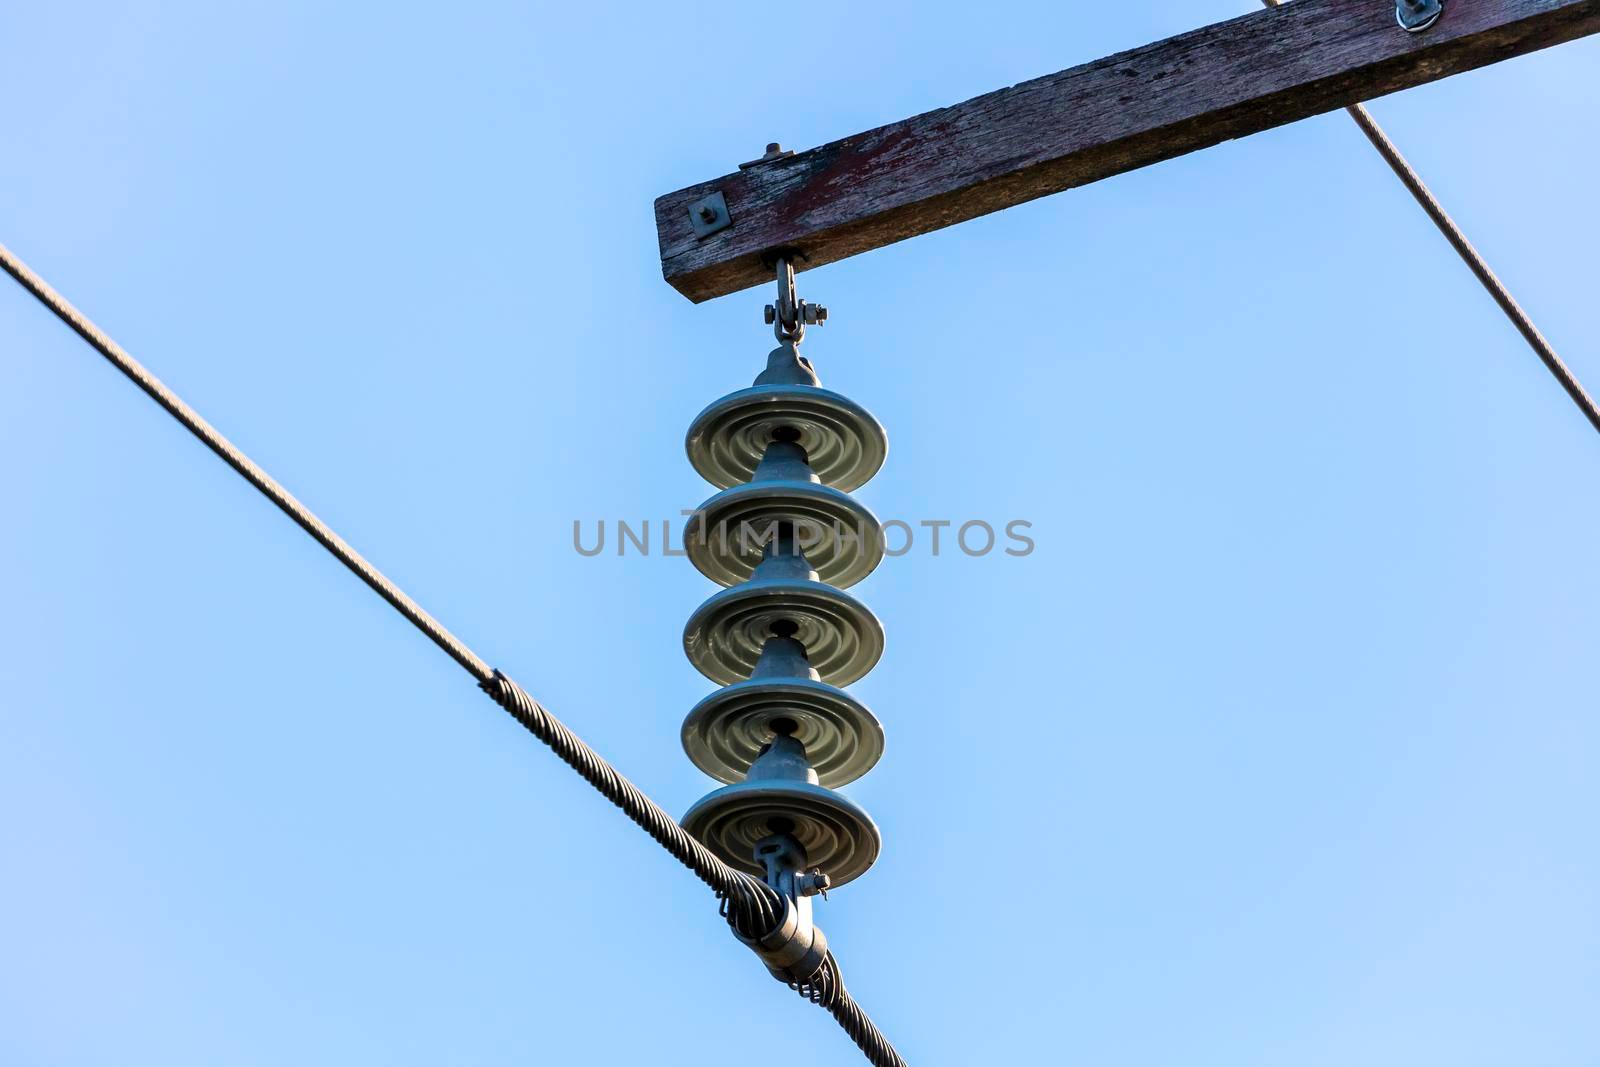 Photograph of a transmission line cable system and assembly by WittkePhotos